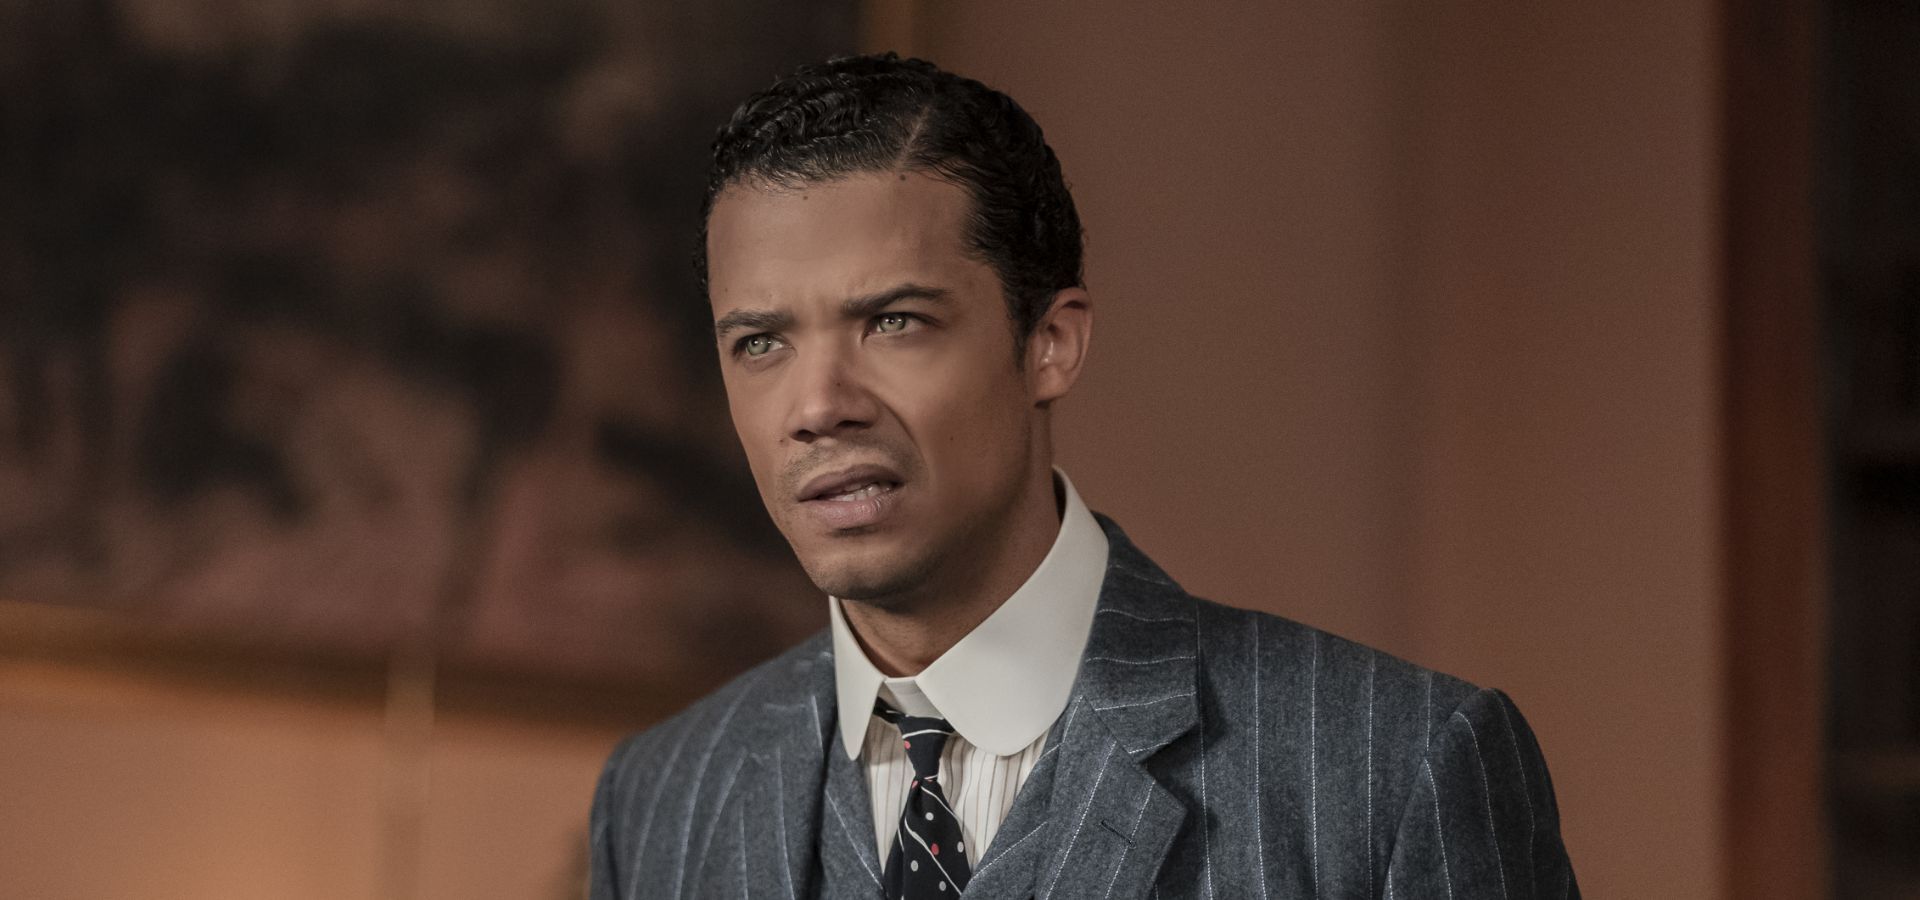 Interview With the Vampire Q&A — Jacob Anderson on Louis Falling Under Lestat’s Spell One Last Time